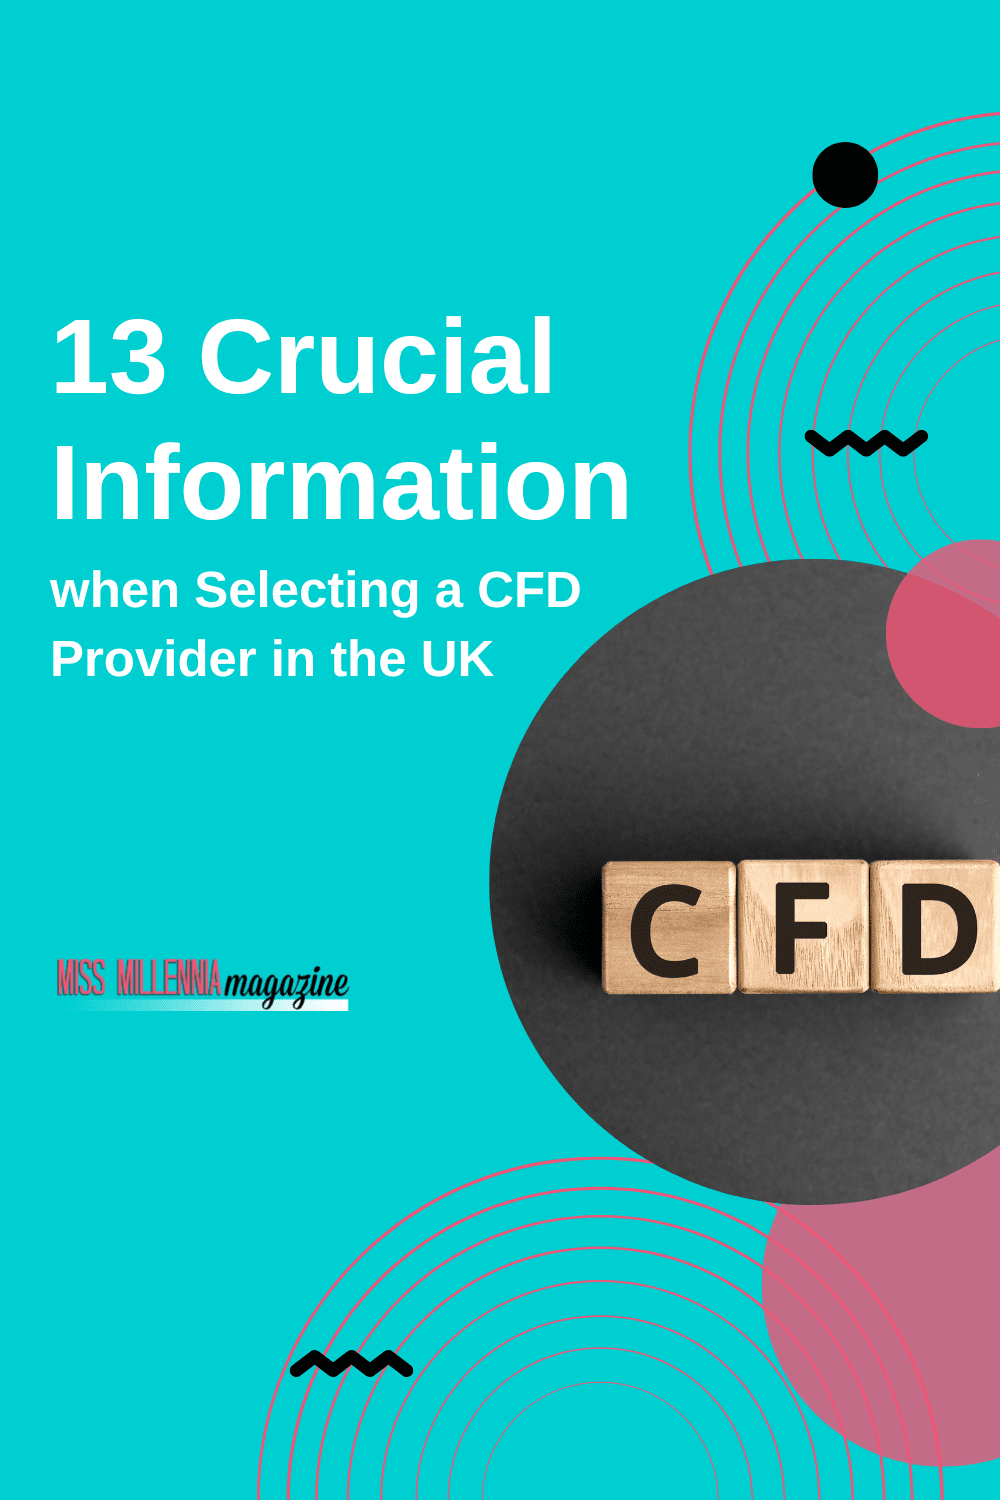 13 Crucial Information when Selecting a CFD Provider in the UK